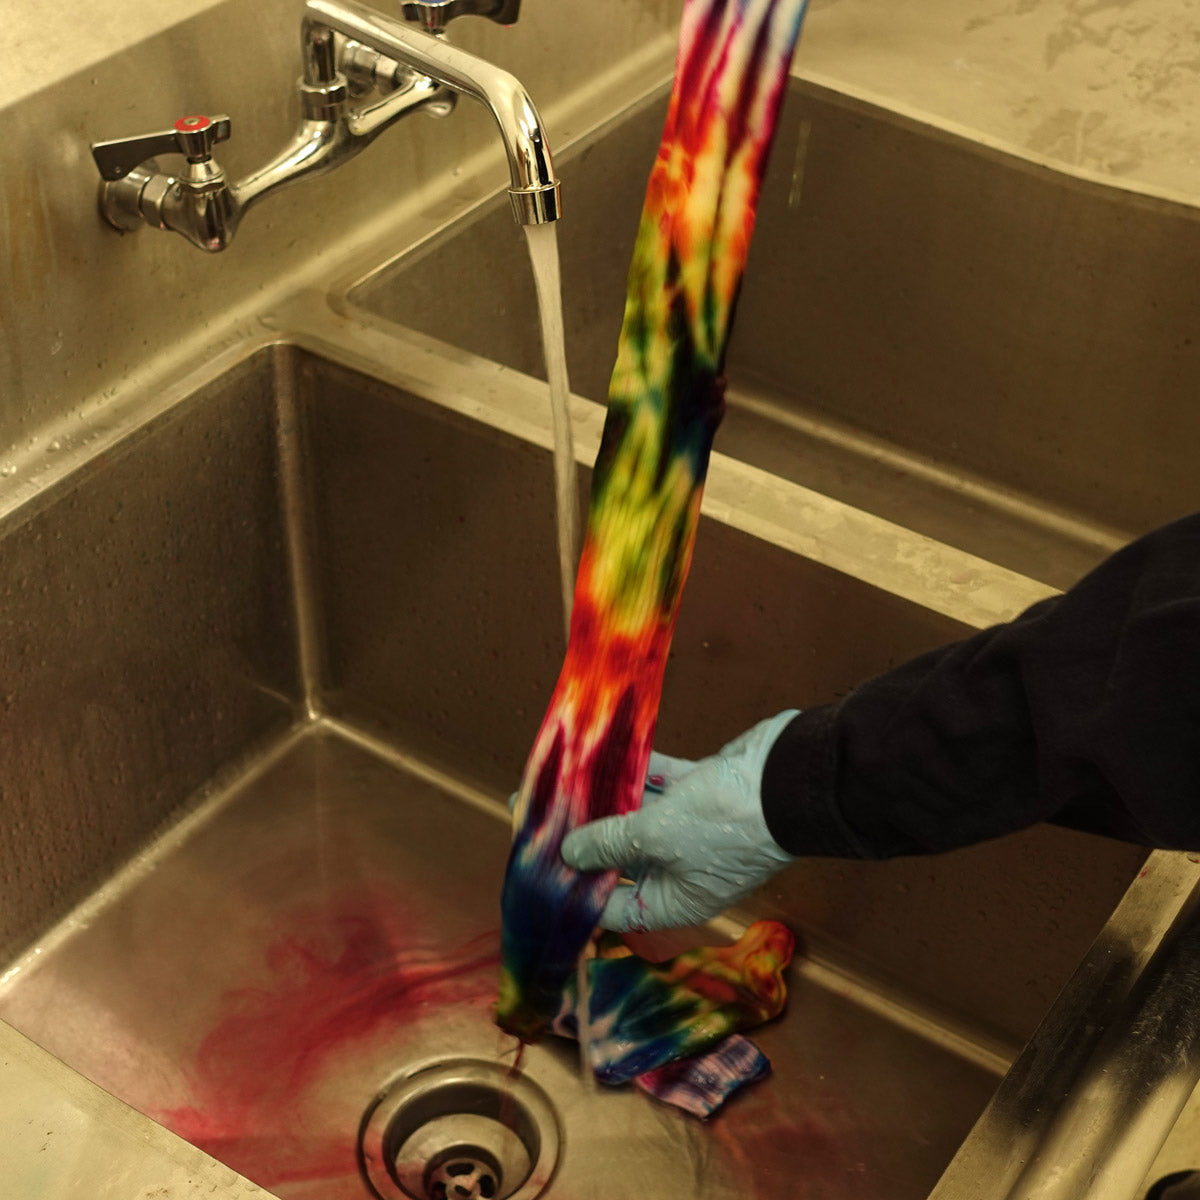 Dye washes down the drain as we rinse tie-dyed socks